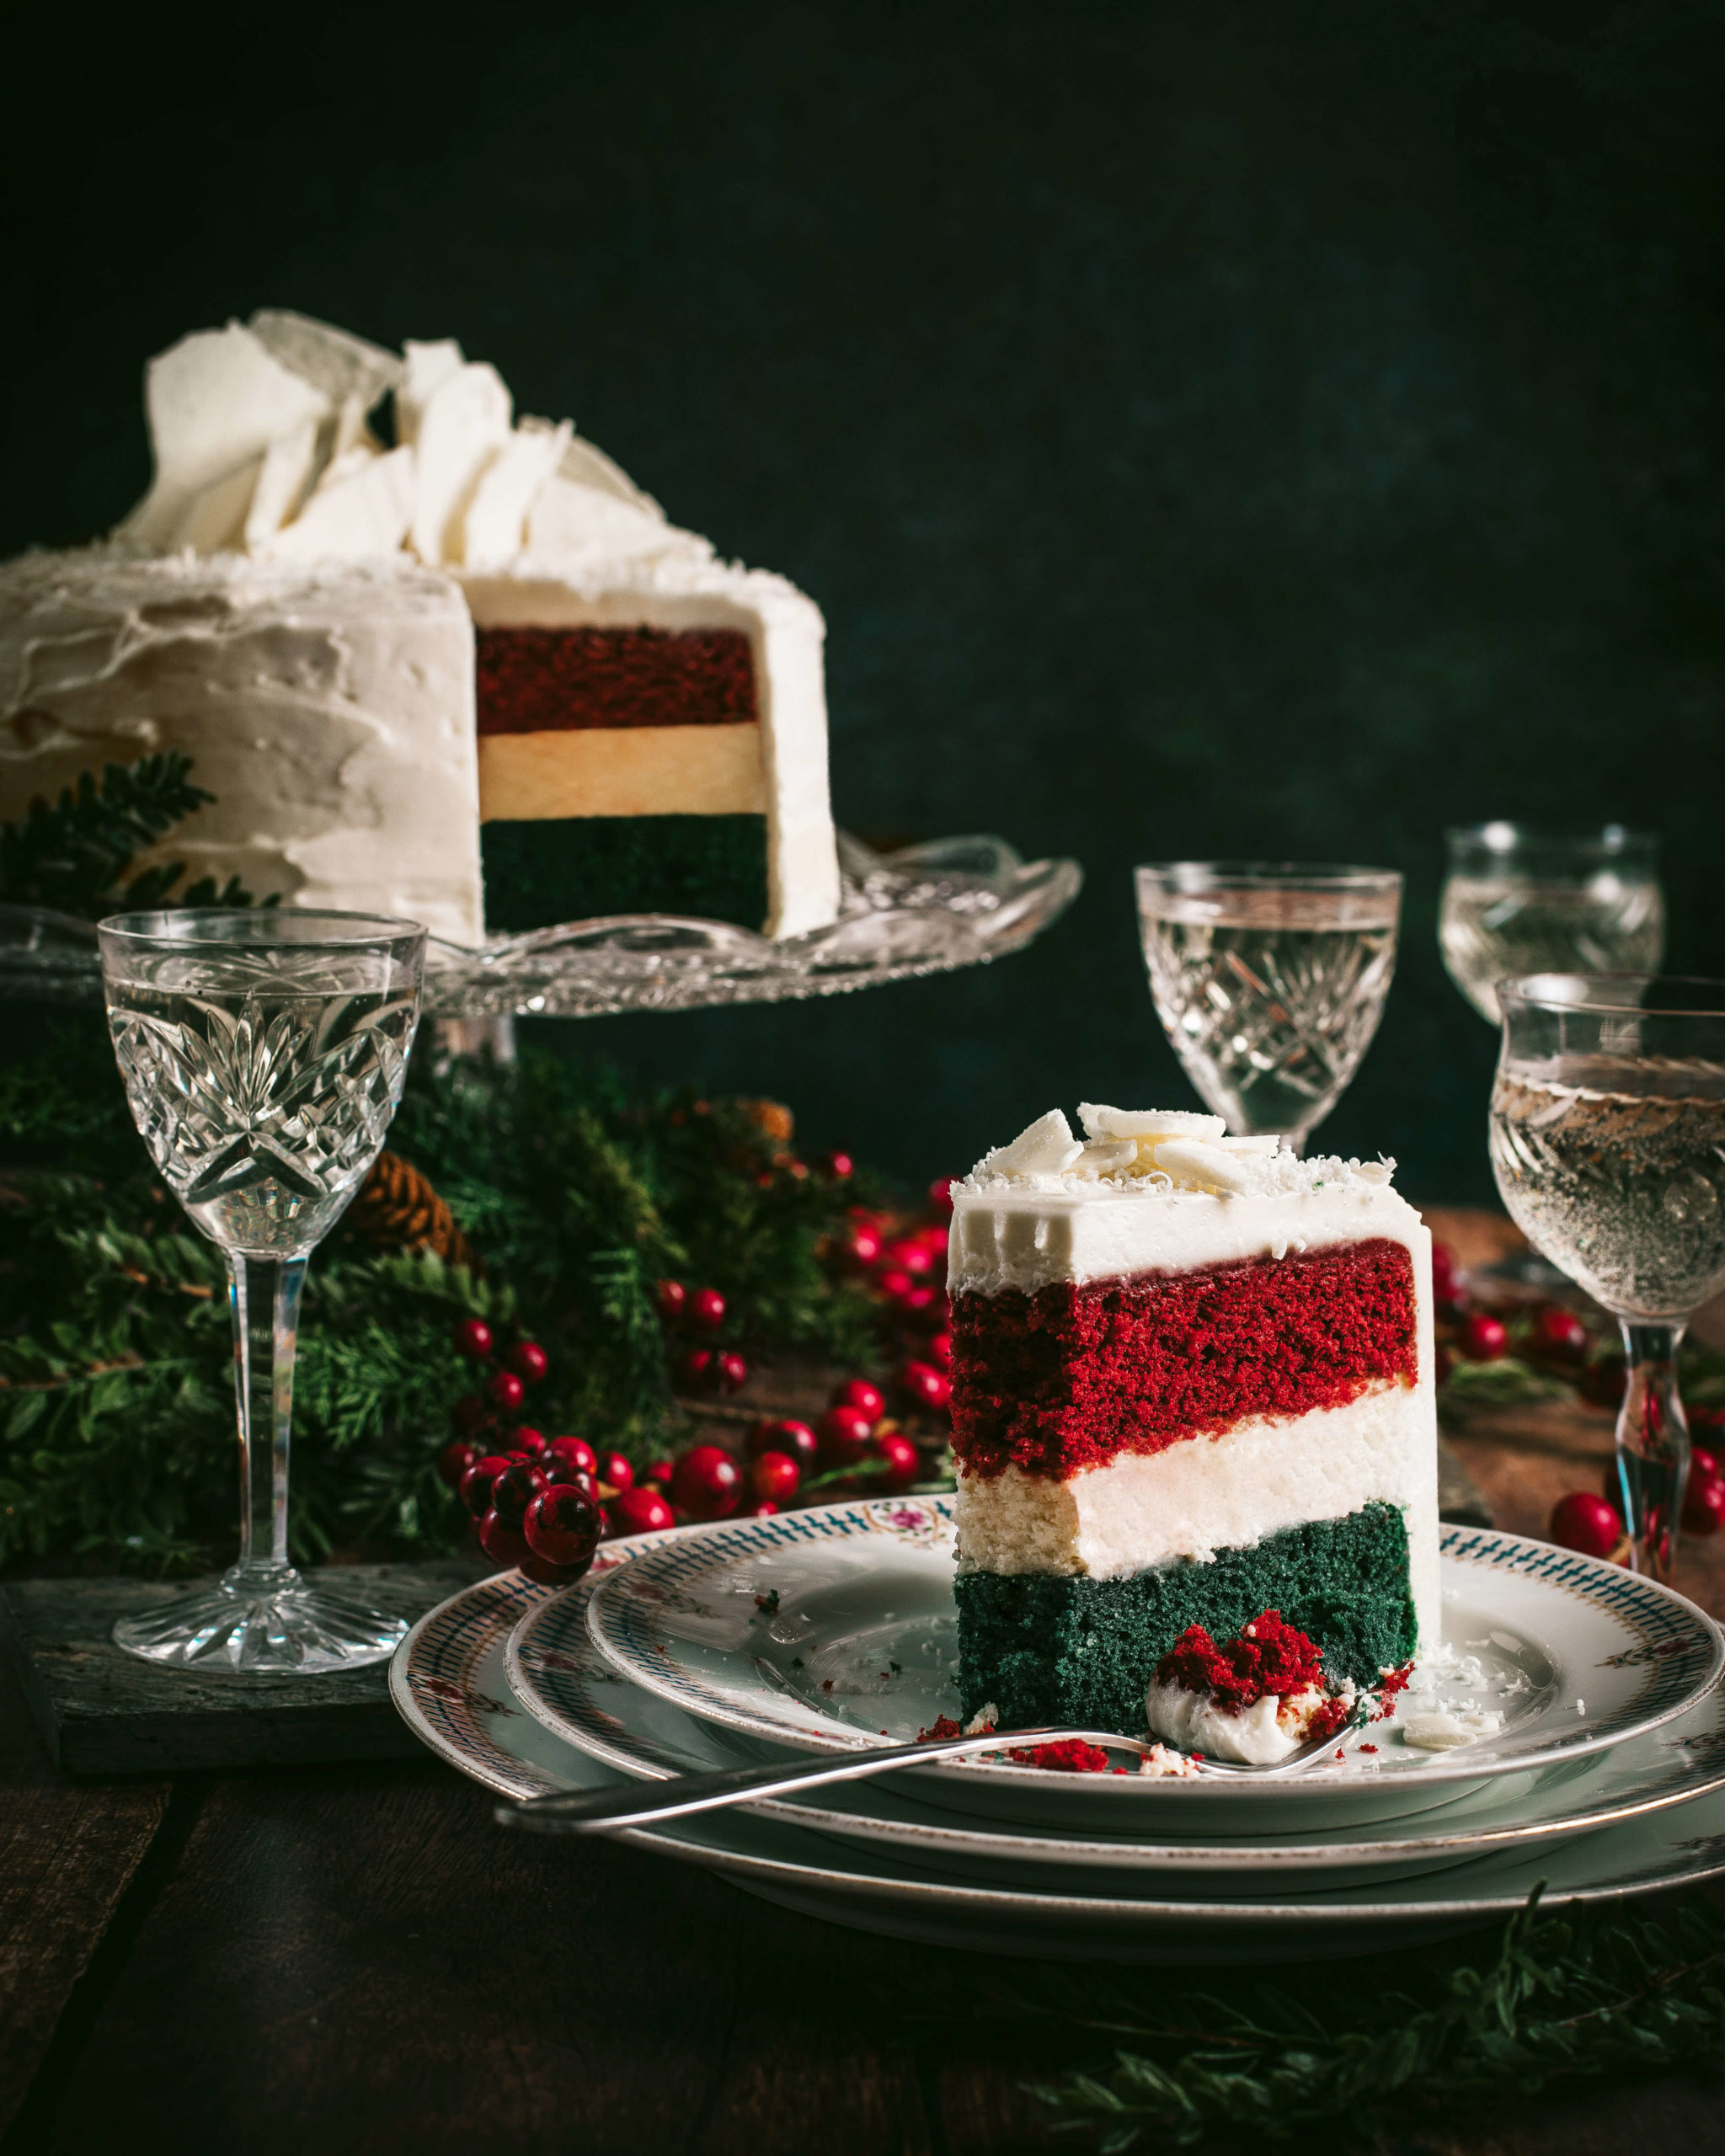 Three layer Red and Green Velvet Cheesecake with cream cheese icing on an crystal cake stand ganished red berries and mince sprigs surrounded by crystal coupe glasses filled with champagne